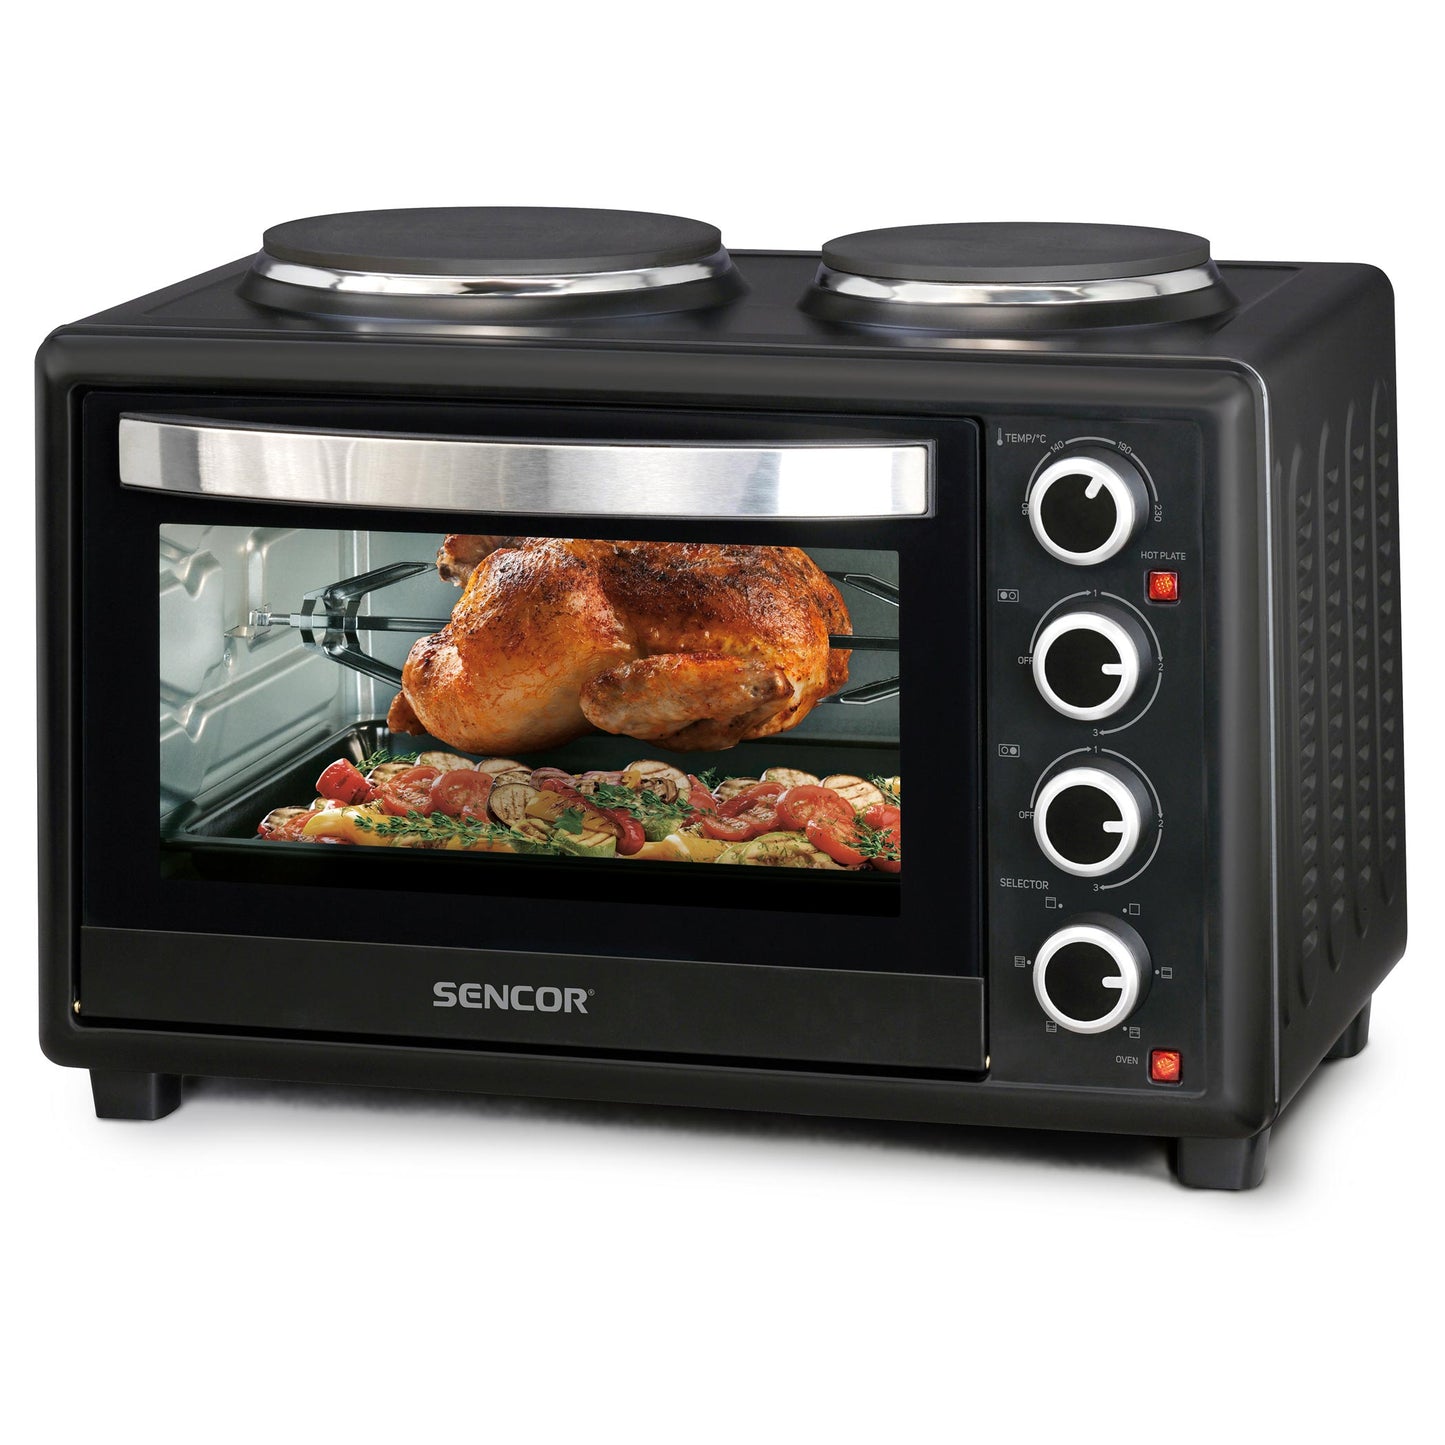 Sencor Table Top Electric Oven with 2 Hot Plates and Rotisserie (SEO2828BK)